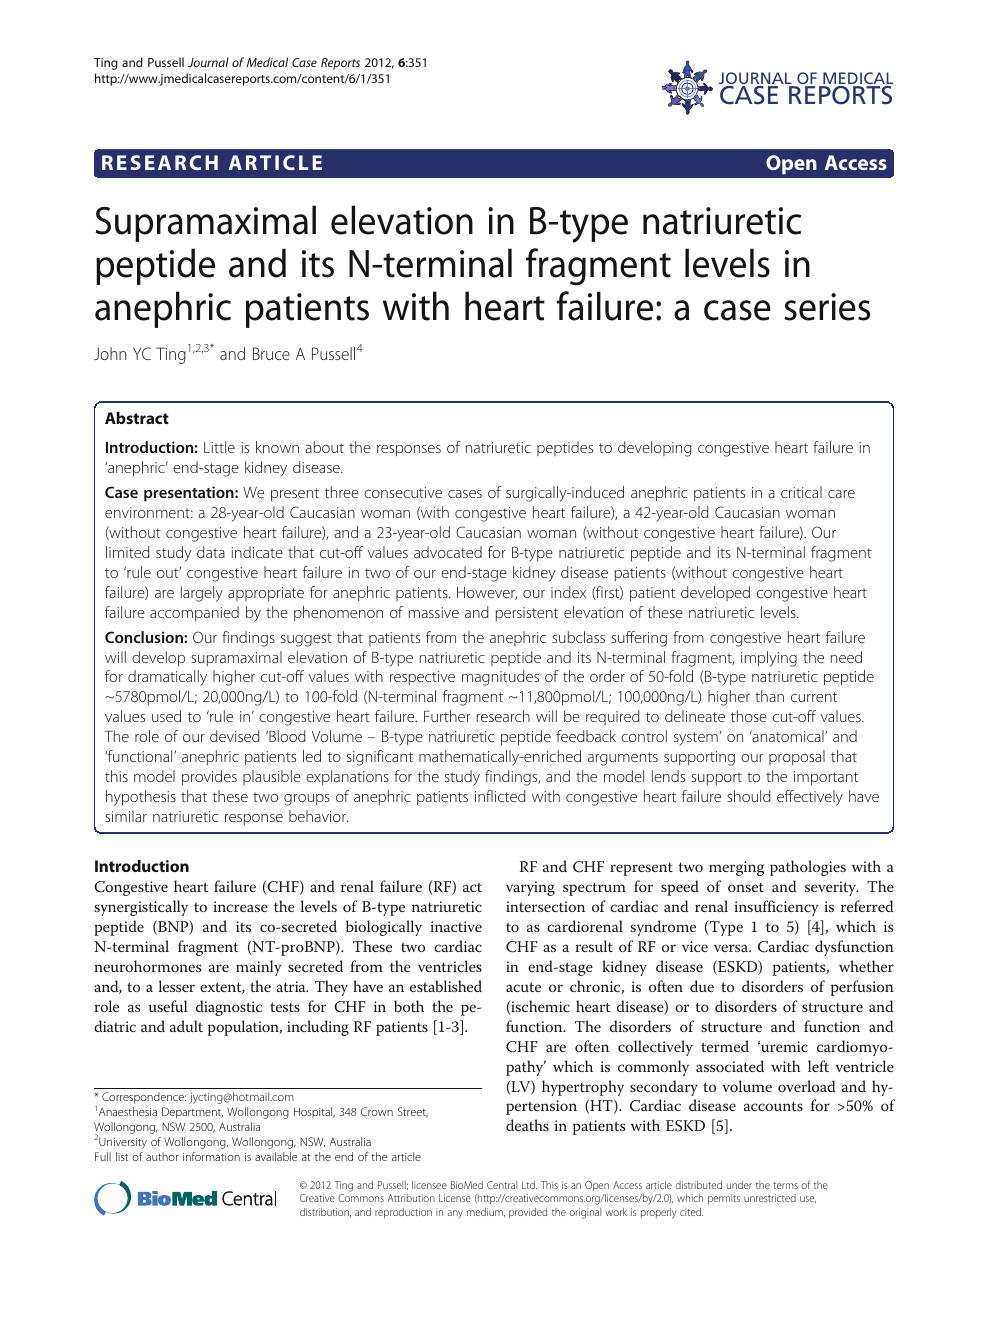 Supramaximal Elevation In B Type Natriuretic Peptide And Its N Terminal Fragment Levels In Anephric Patients With Heart Failure A Case Series Topic Of Research Paper In Clinical Medicine Download Scholarly Article Pdf